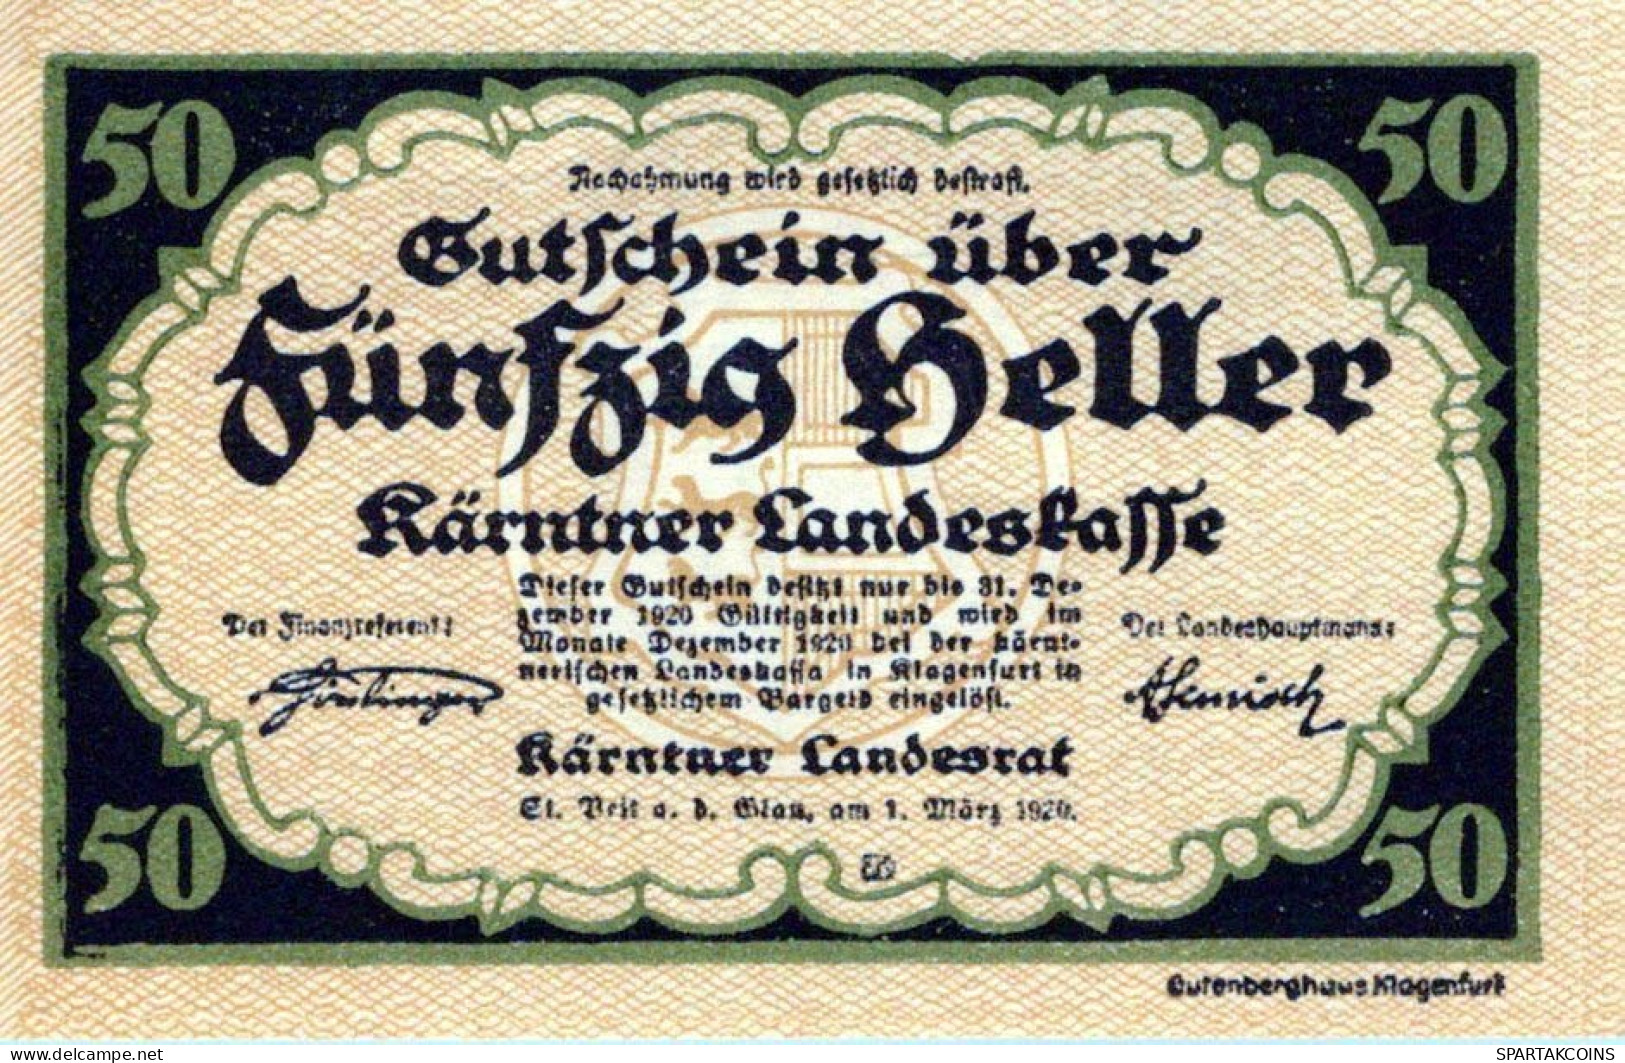 50 HELLER 1920 Stadt CARINTHIA Carinthia Österreich Notgeld Banknote #PF770 - [11] Local Banknote Issues